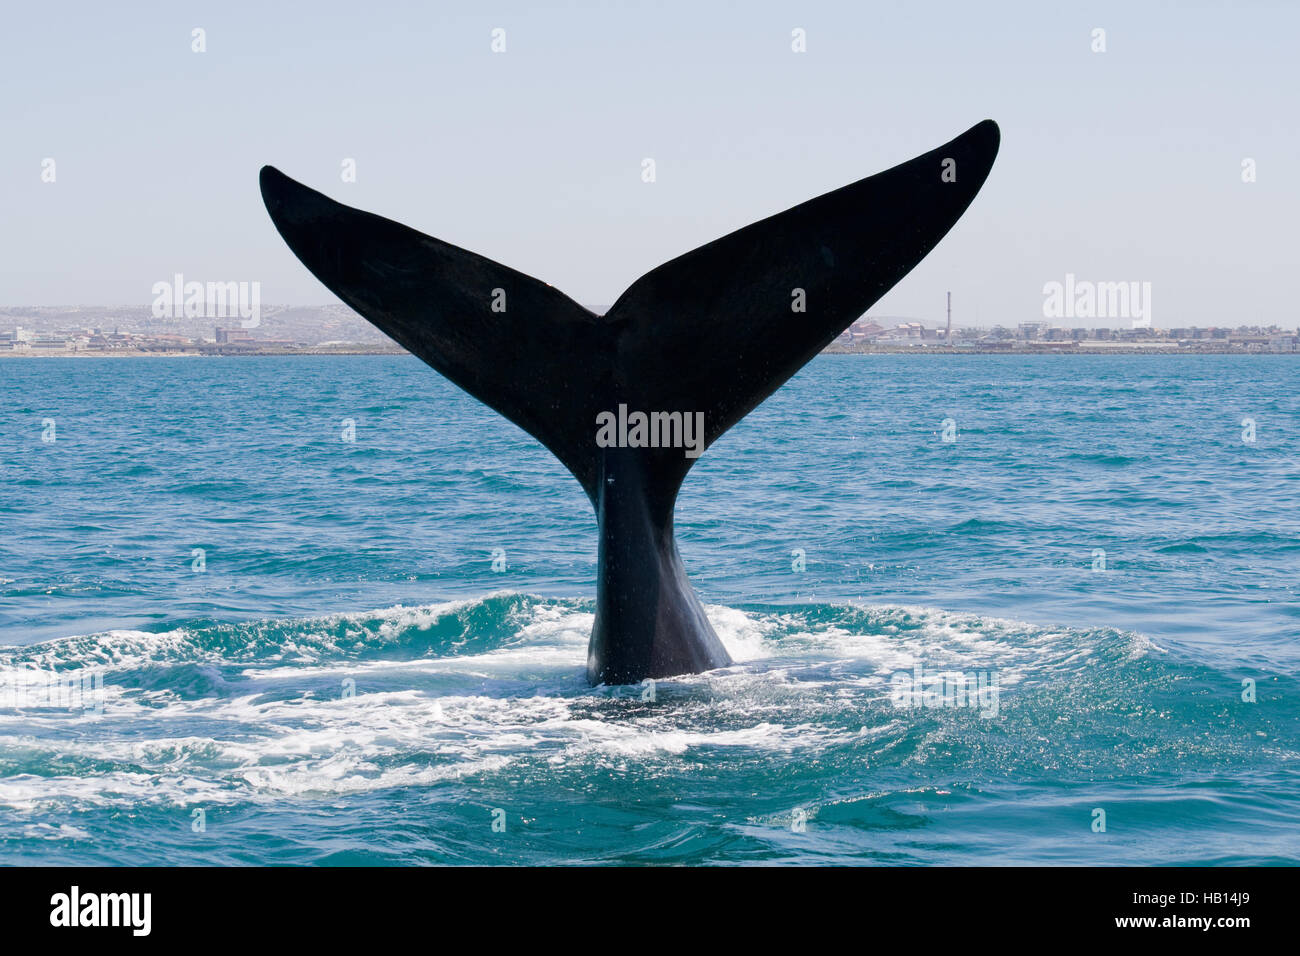 Southern right whale diving into water. Stock Photo